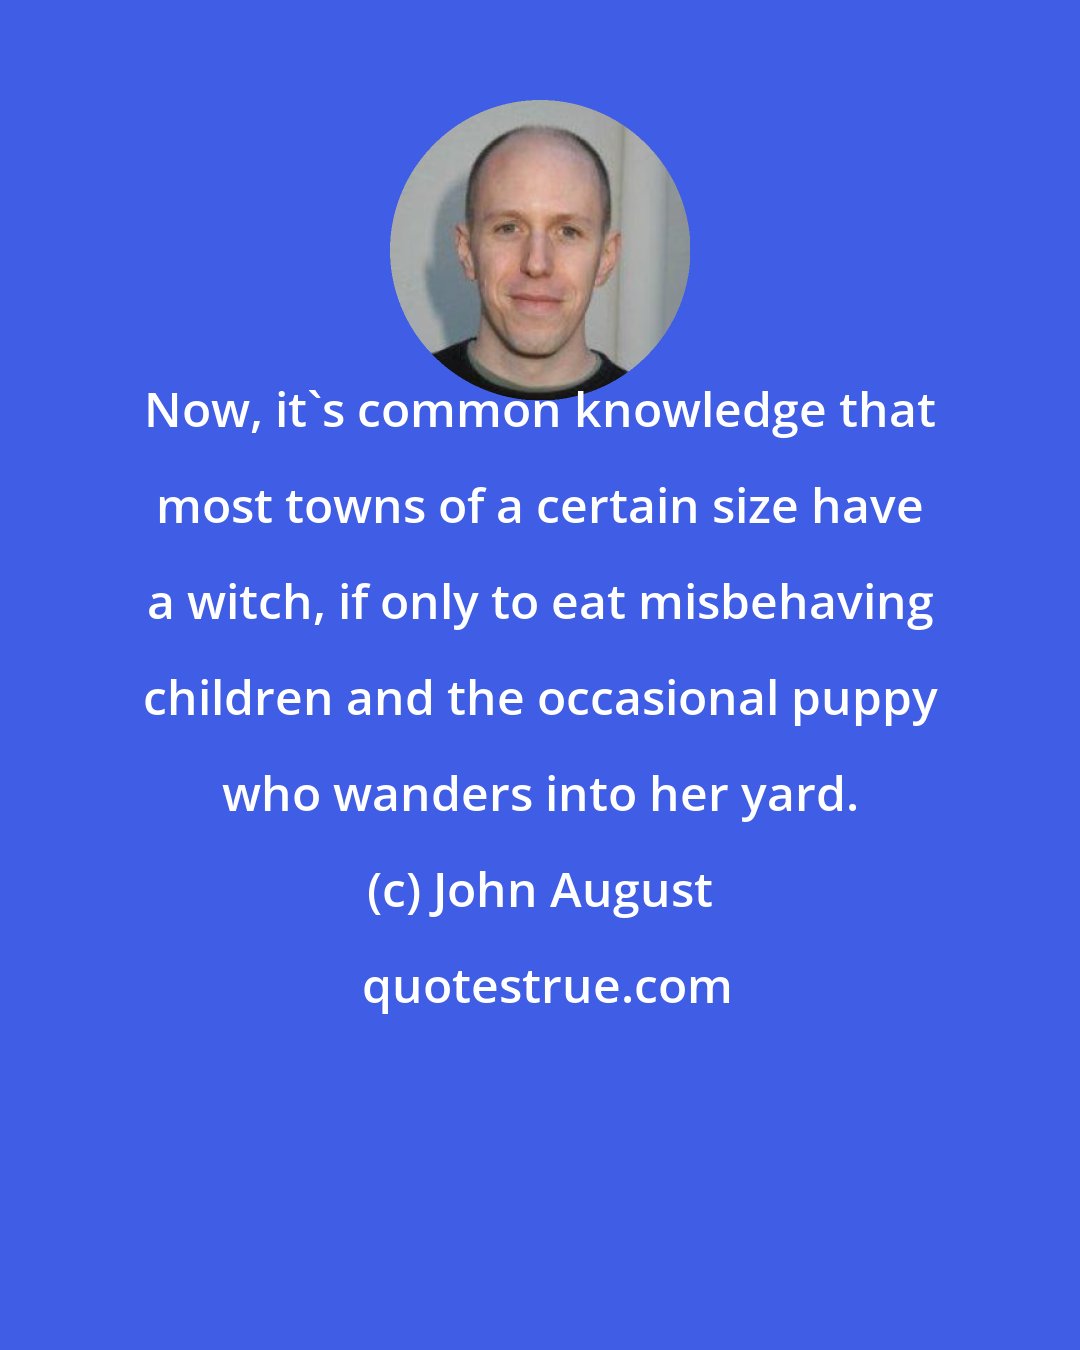 John August: Now, it's common knowledge that most towns of a certain size have a witch, if only to eat misbehaving children and the occasional puppy who wanders into her yard.